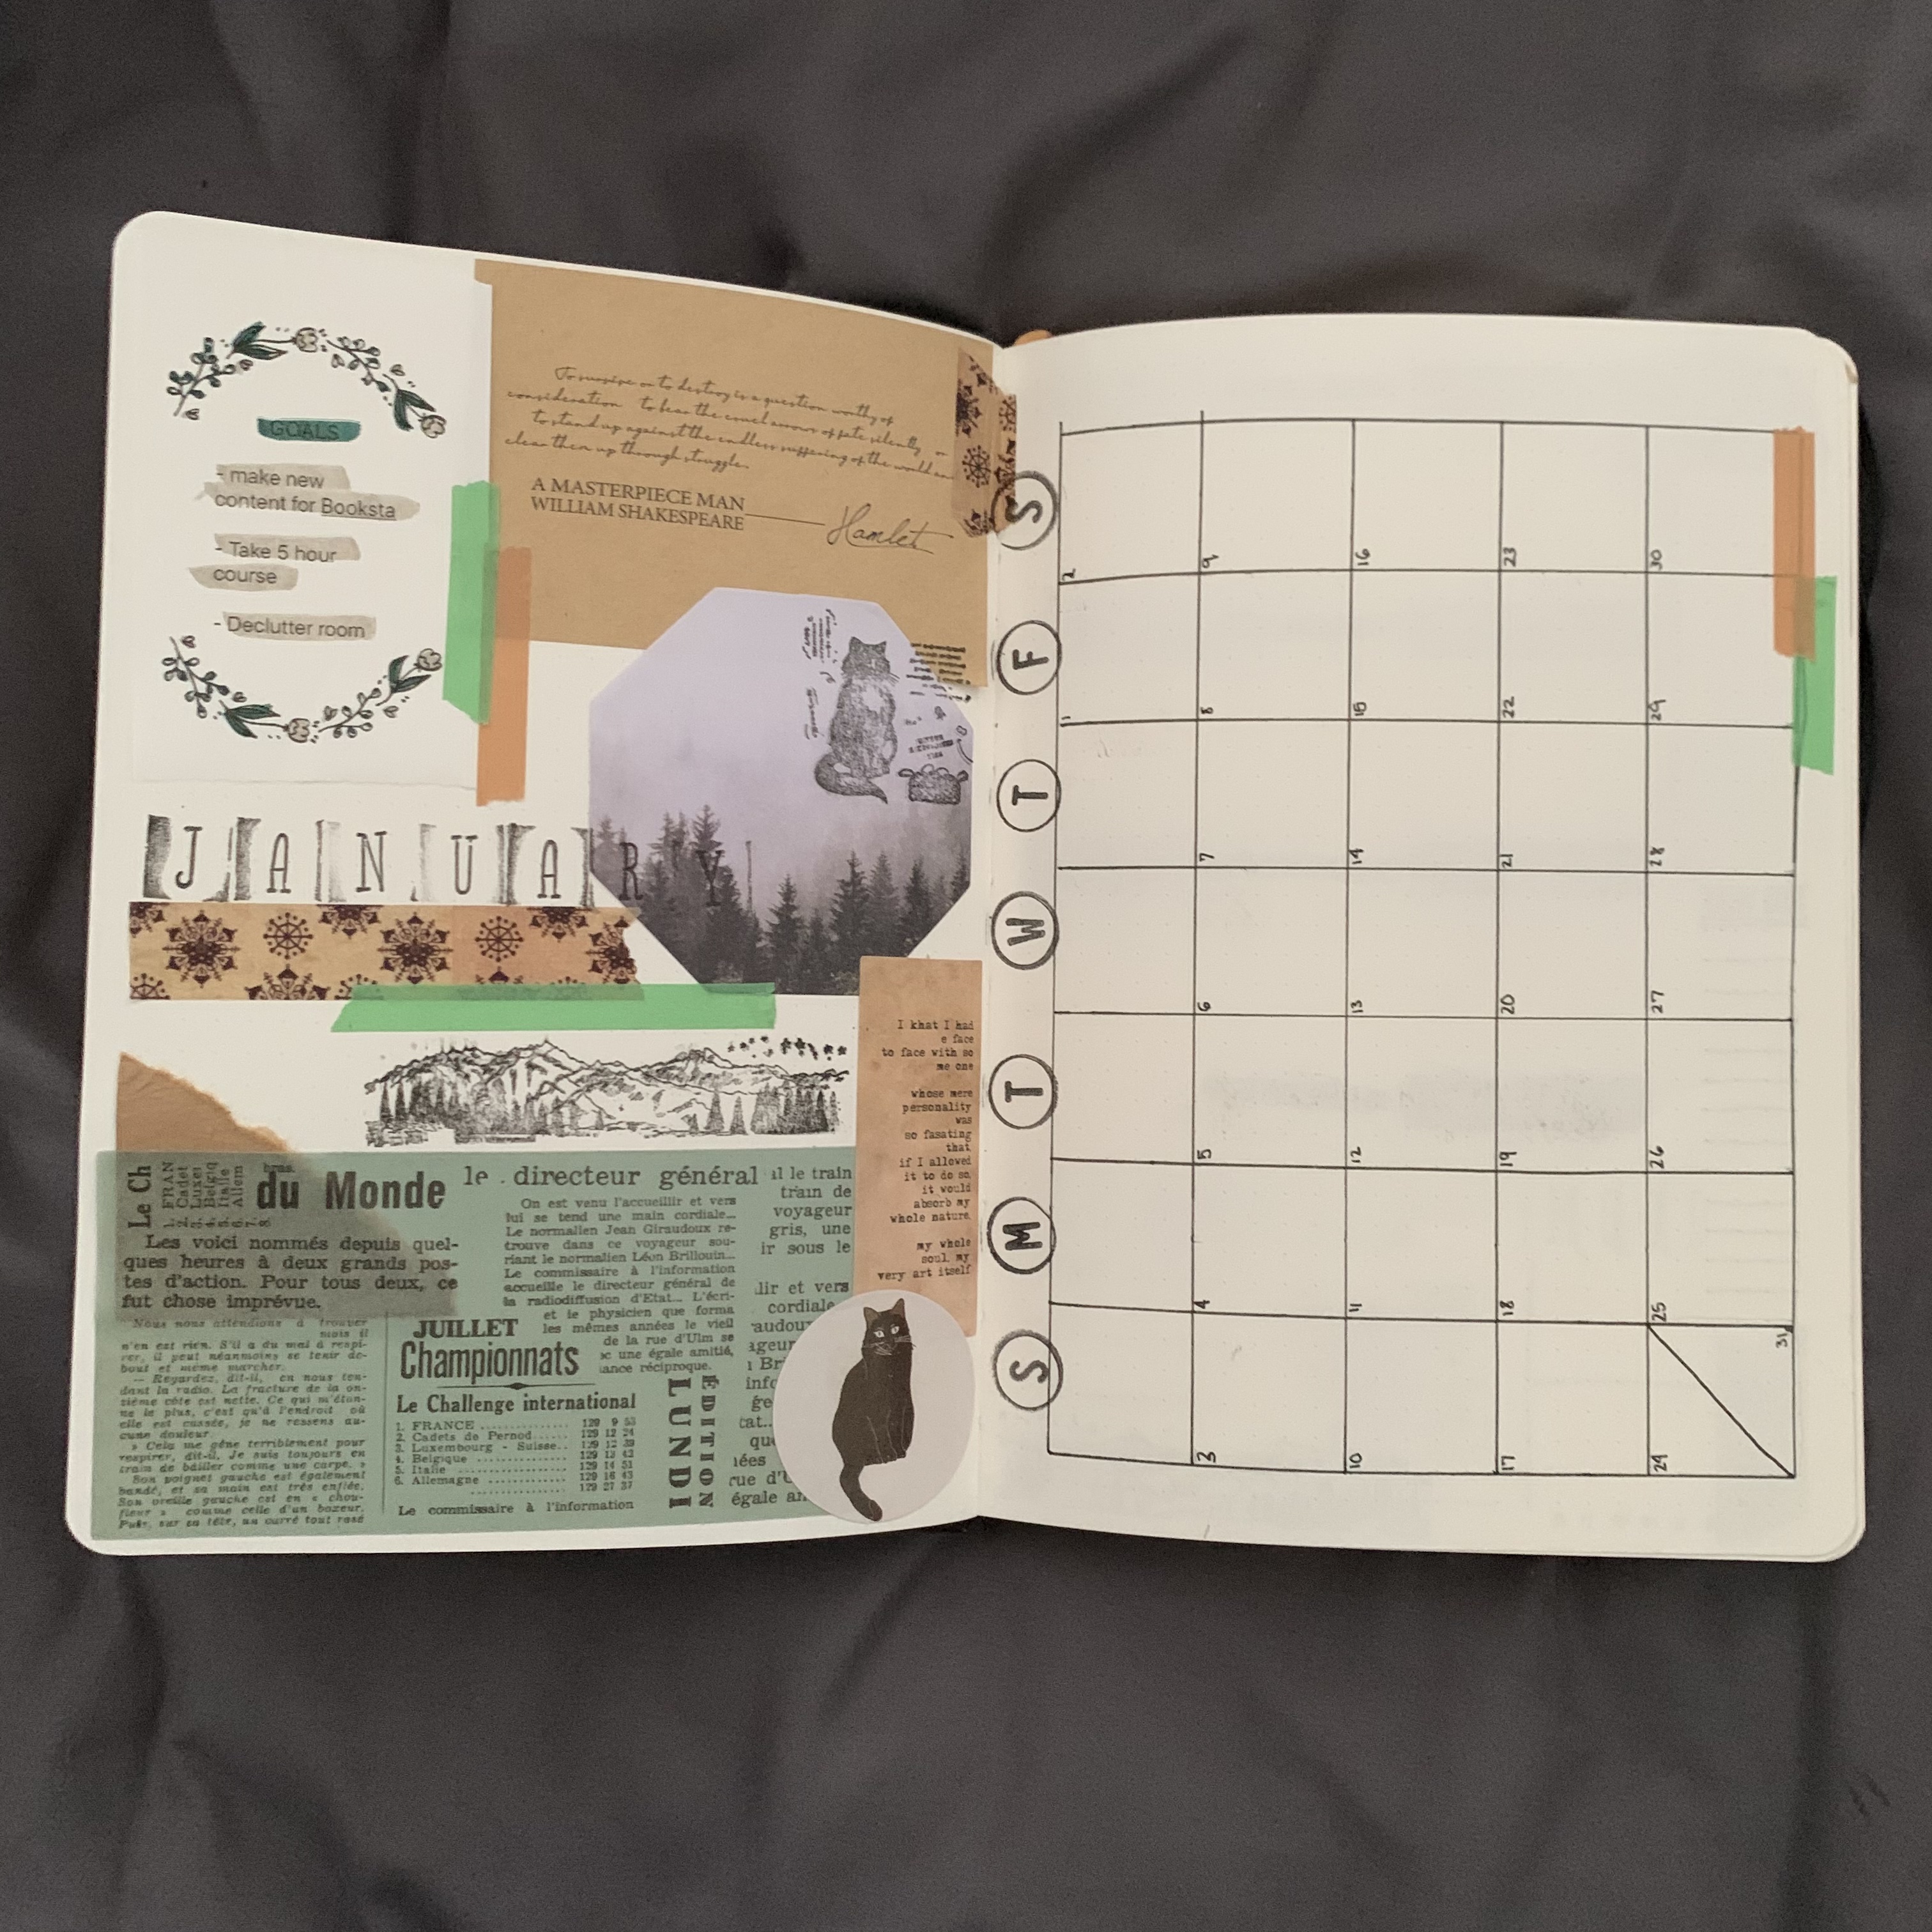 2021 Bullet Journal Spread - January Title Page and Calendar